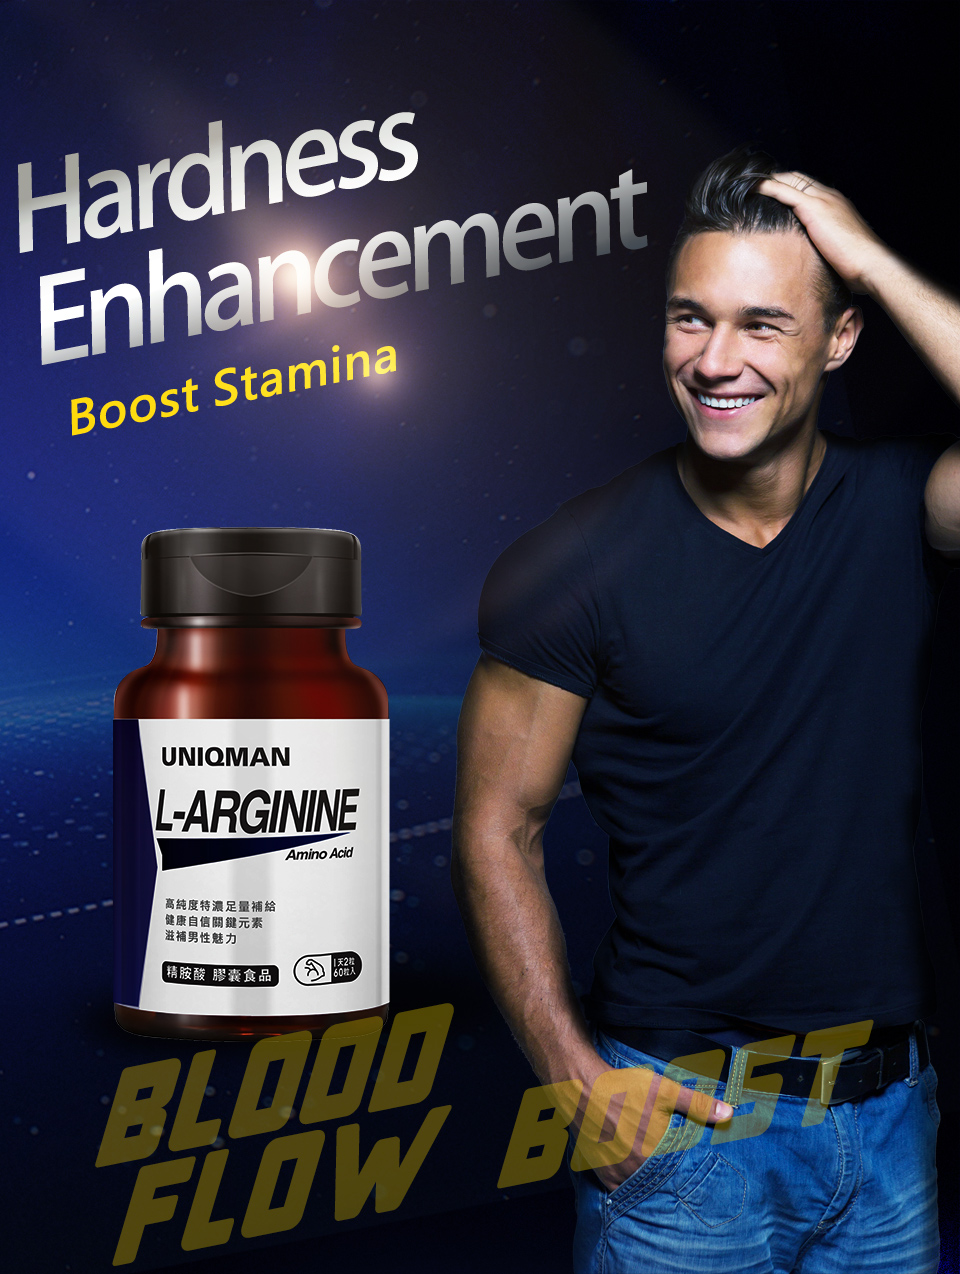 UNIQMAN L-Arginine can assist in the production of nitric oxide, help vasodilation and promote congestion